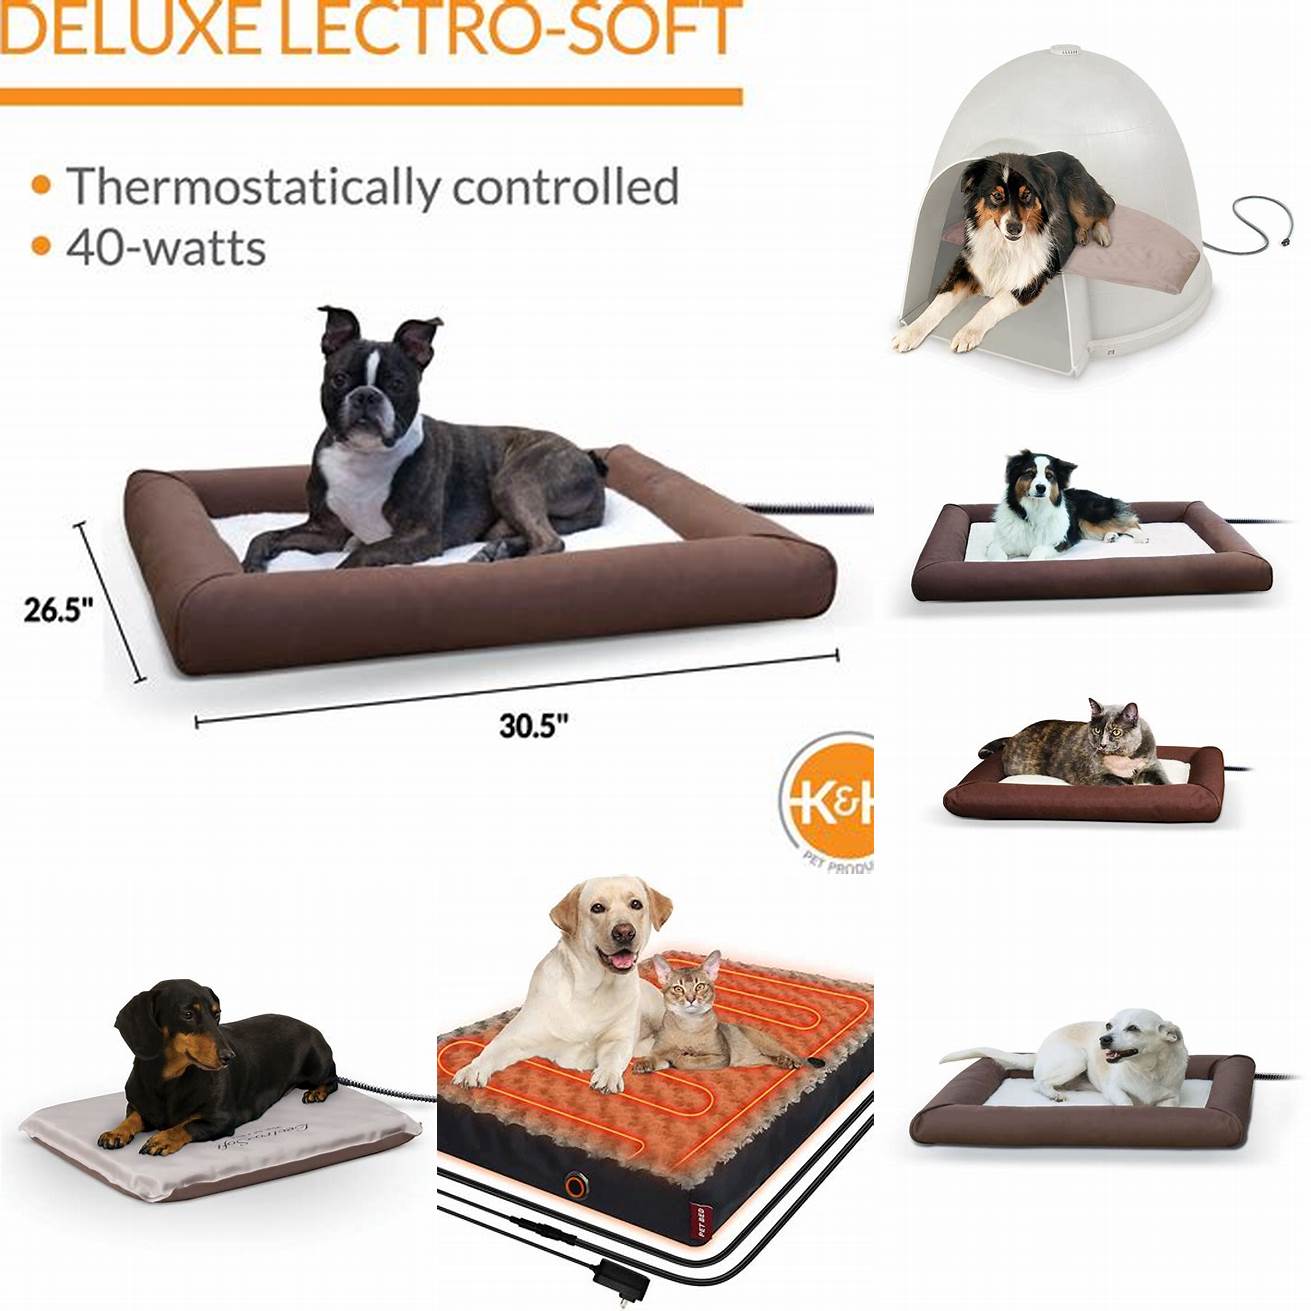 3 Outdoor Heated Dog Beds